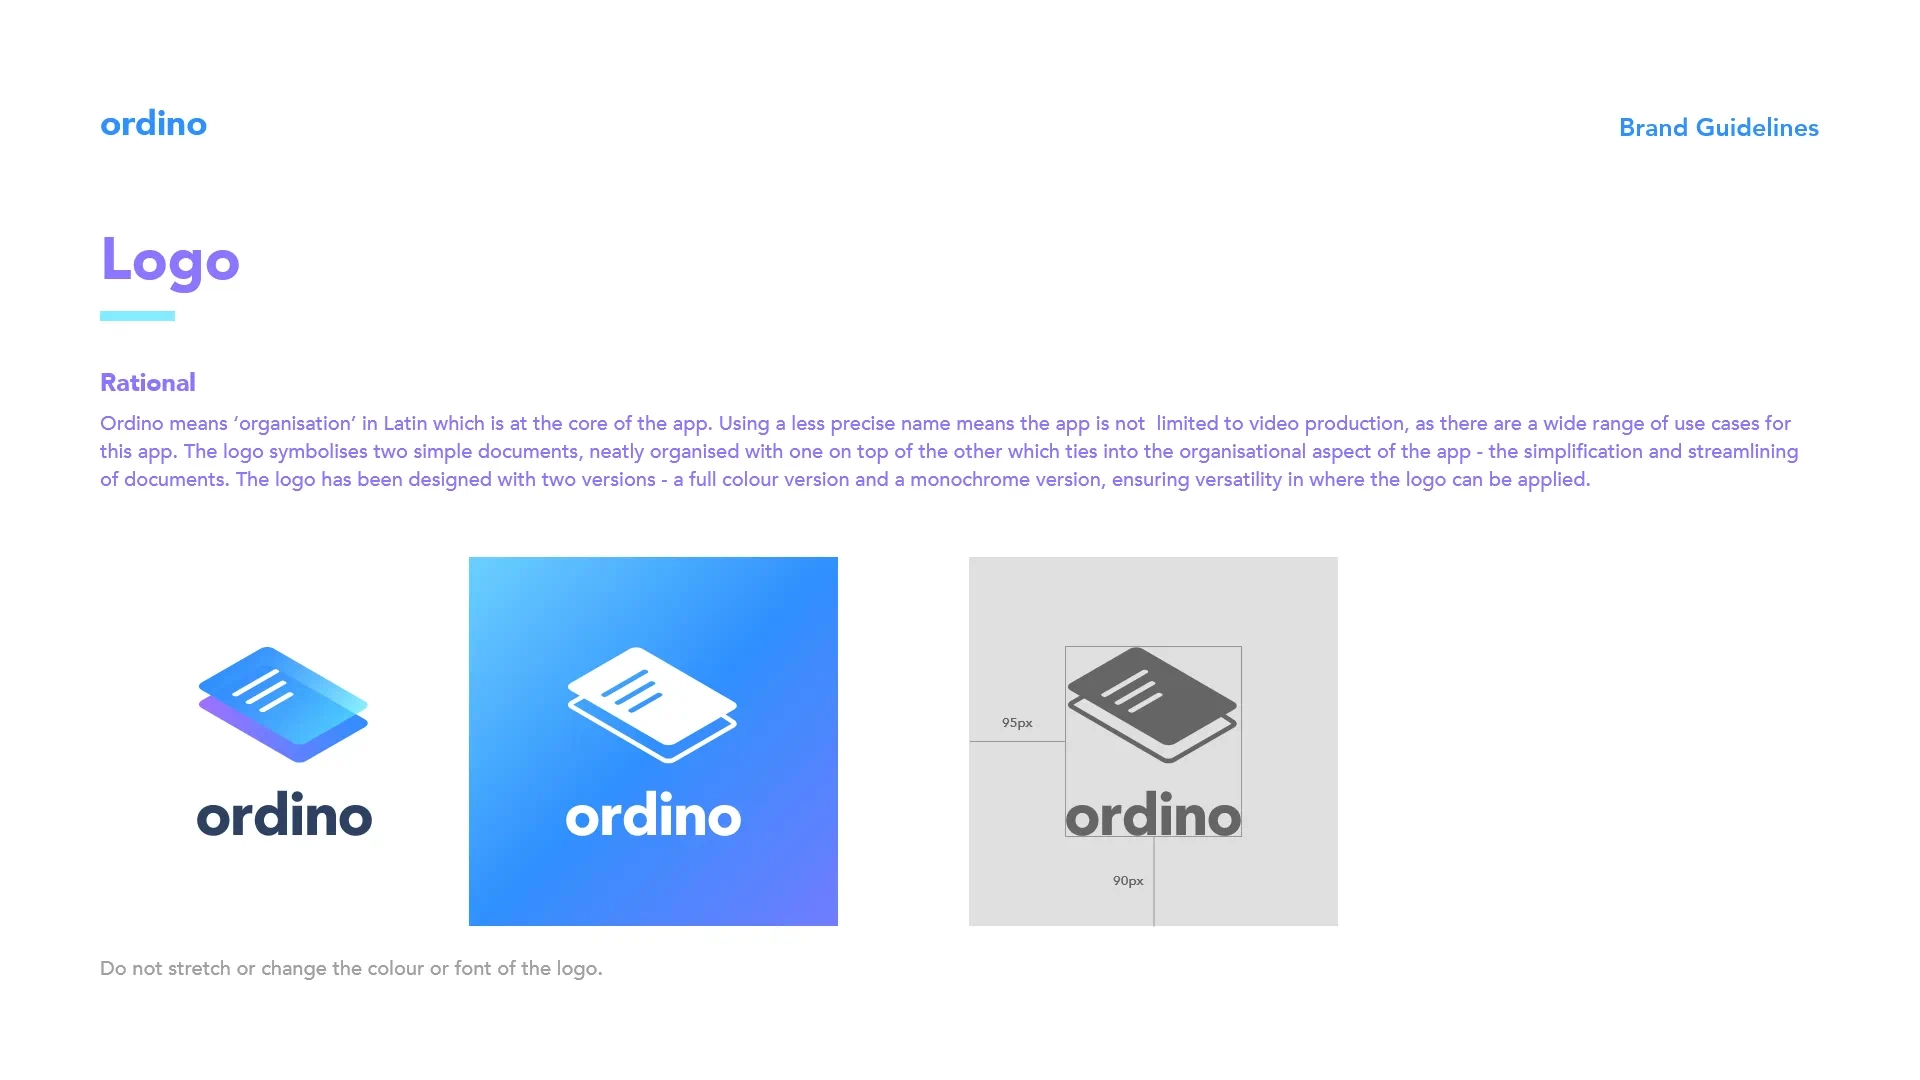 The third page of the Ordino brand guidelines outlines the various versions of the logo available